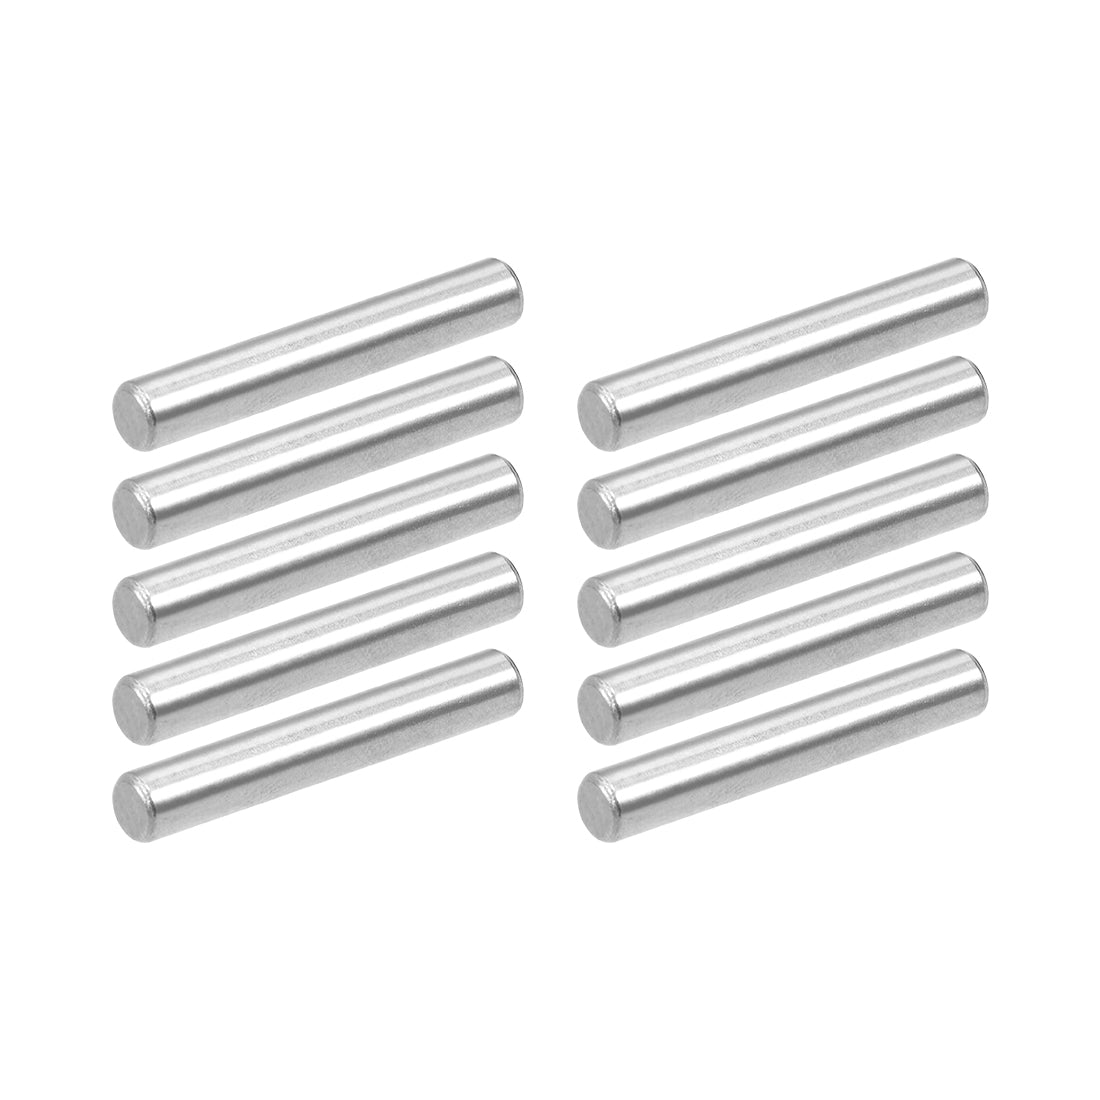 uxcell Uxcell 10Pcs 4mm x 25mm Dowel Pin 304 Stainless Steel Shelf Support Pin Fasten Elements Silver Tone